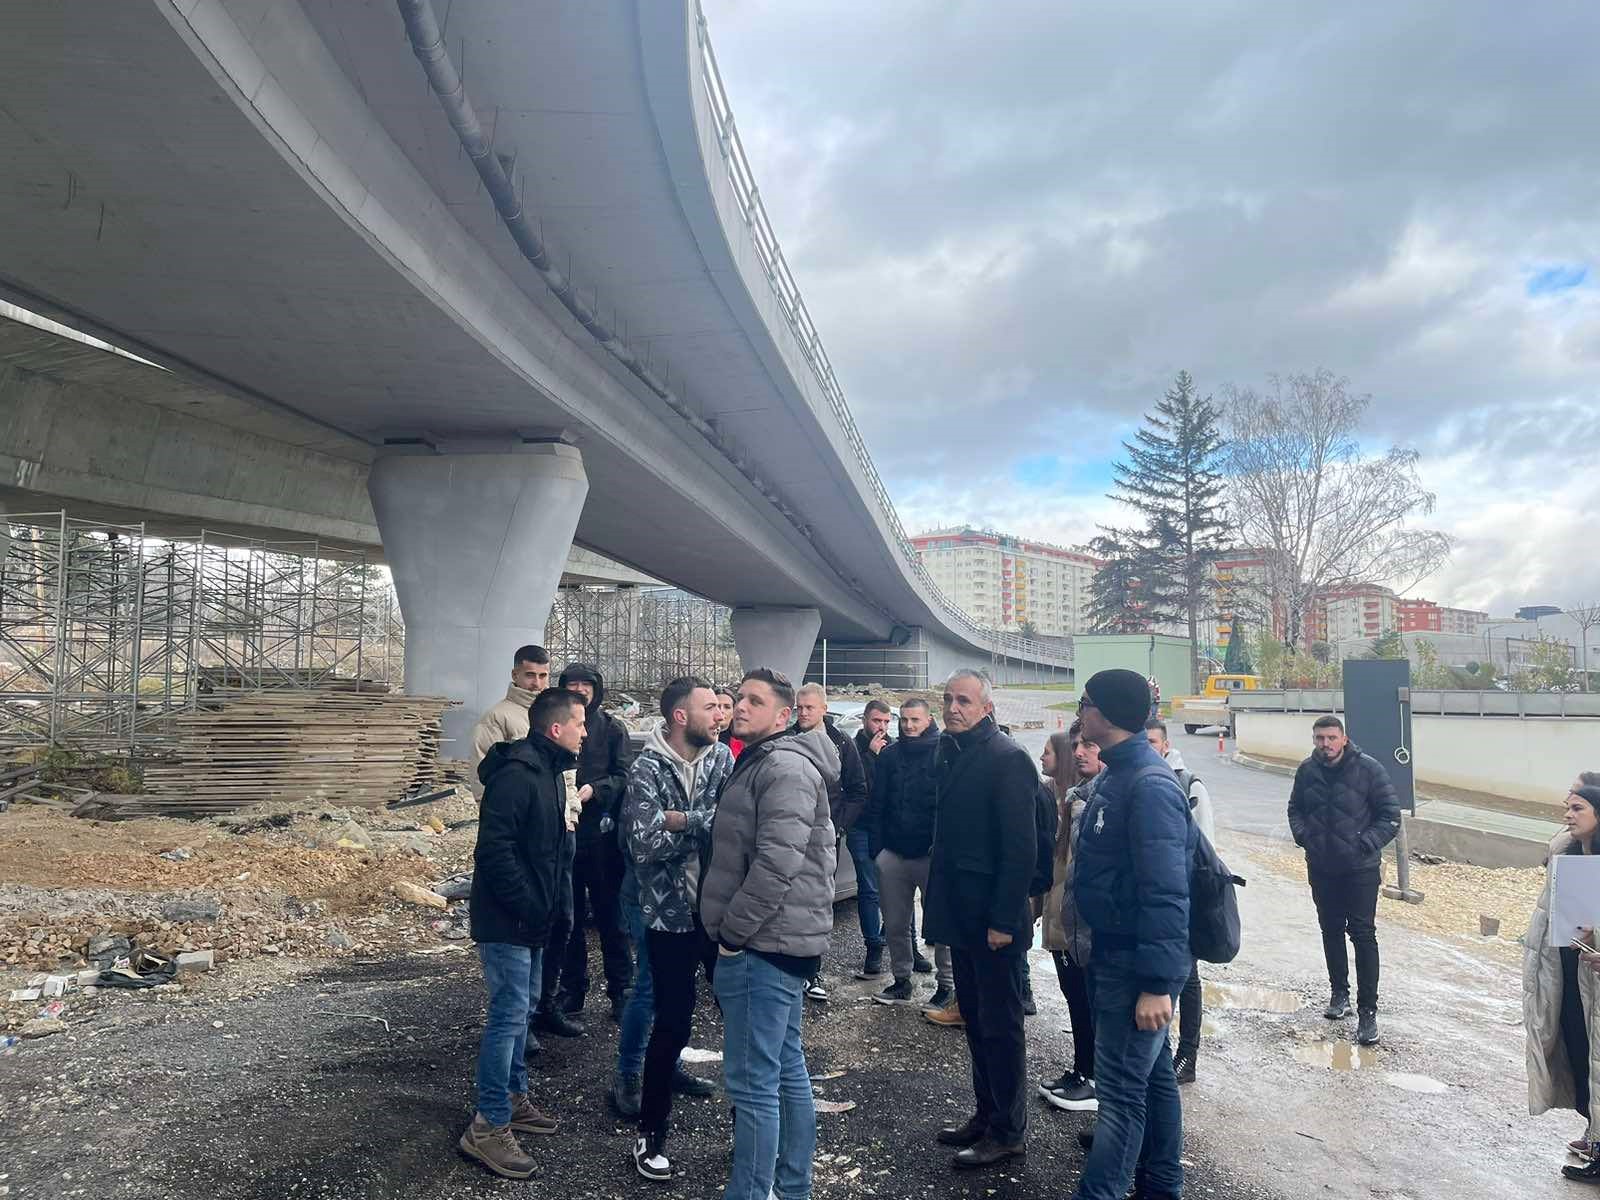 Students of the Faculty of Civil Engineering and Infrastructure at UBT conducted a study visit to the bridge near the Dukagjini facility in Pristina